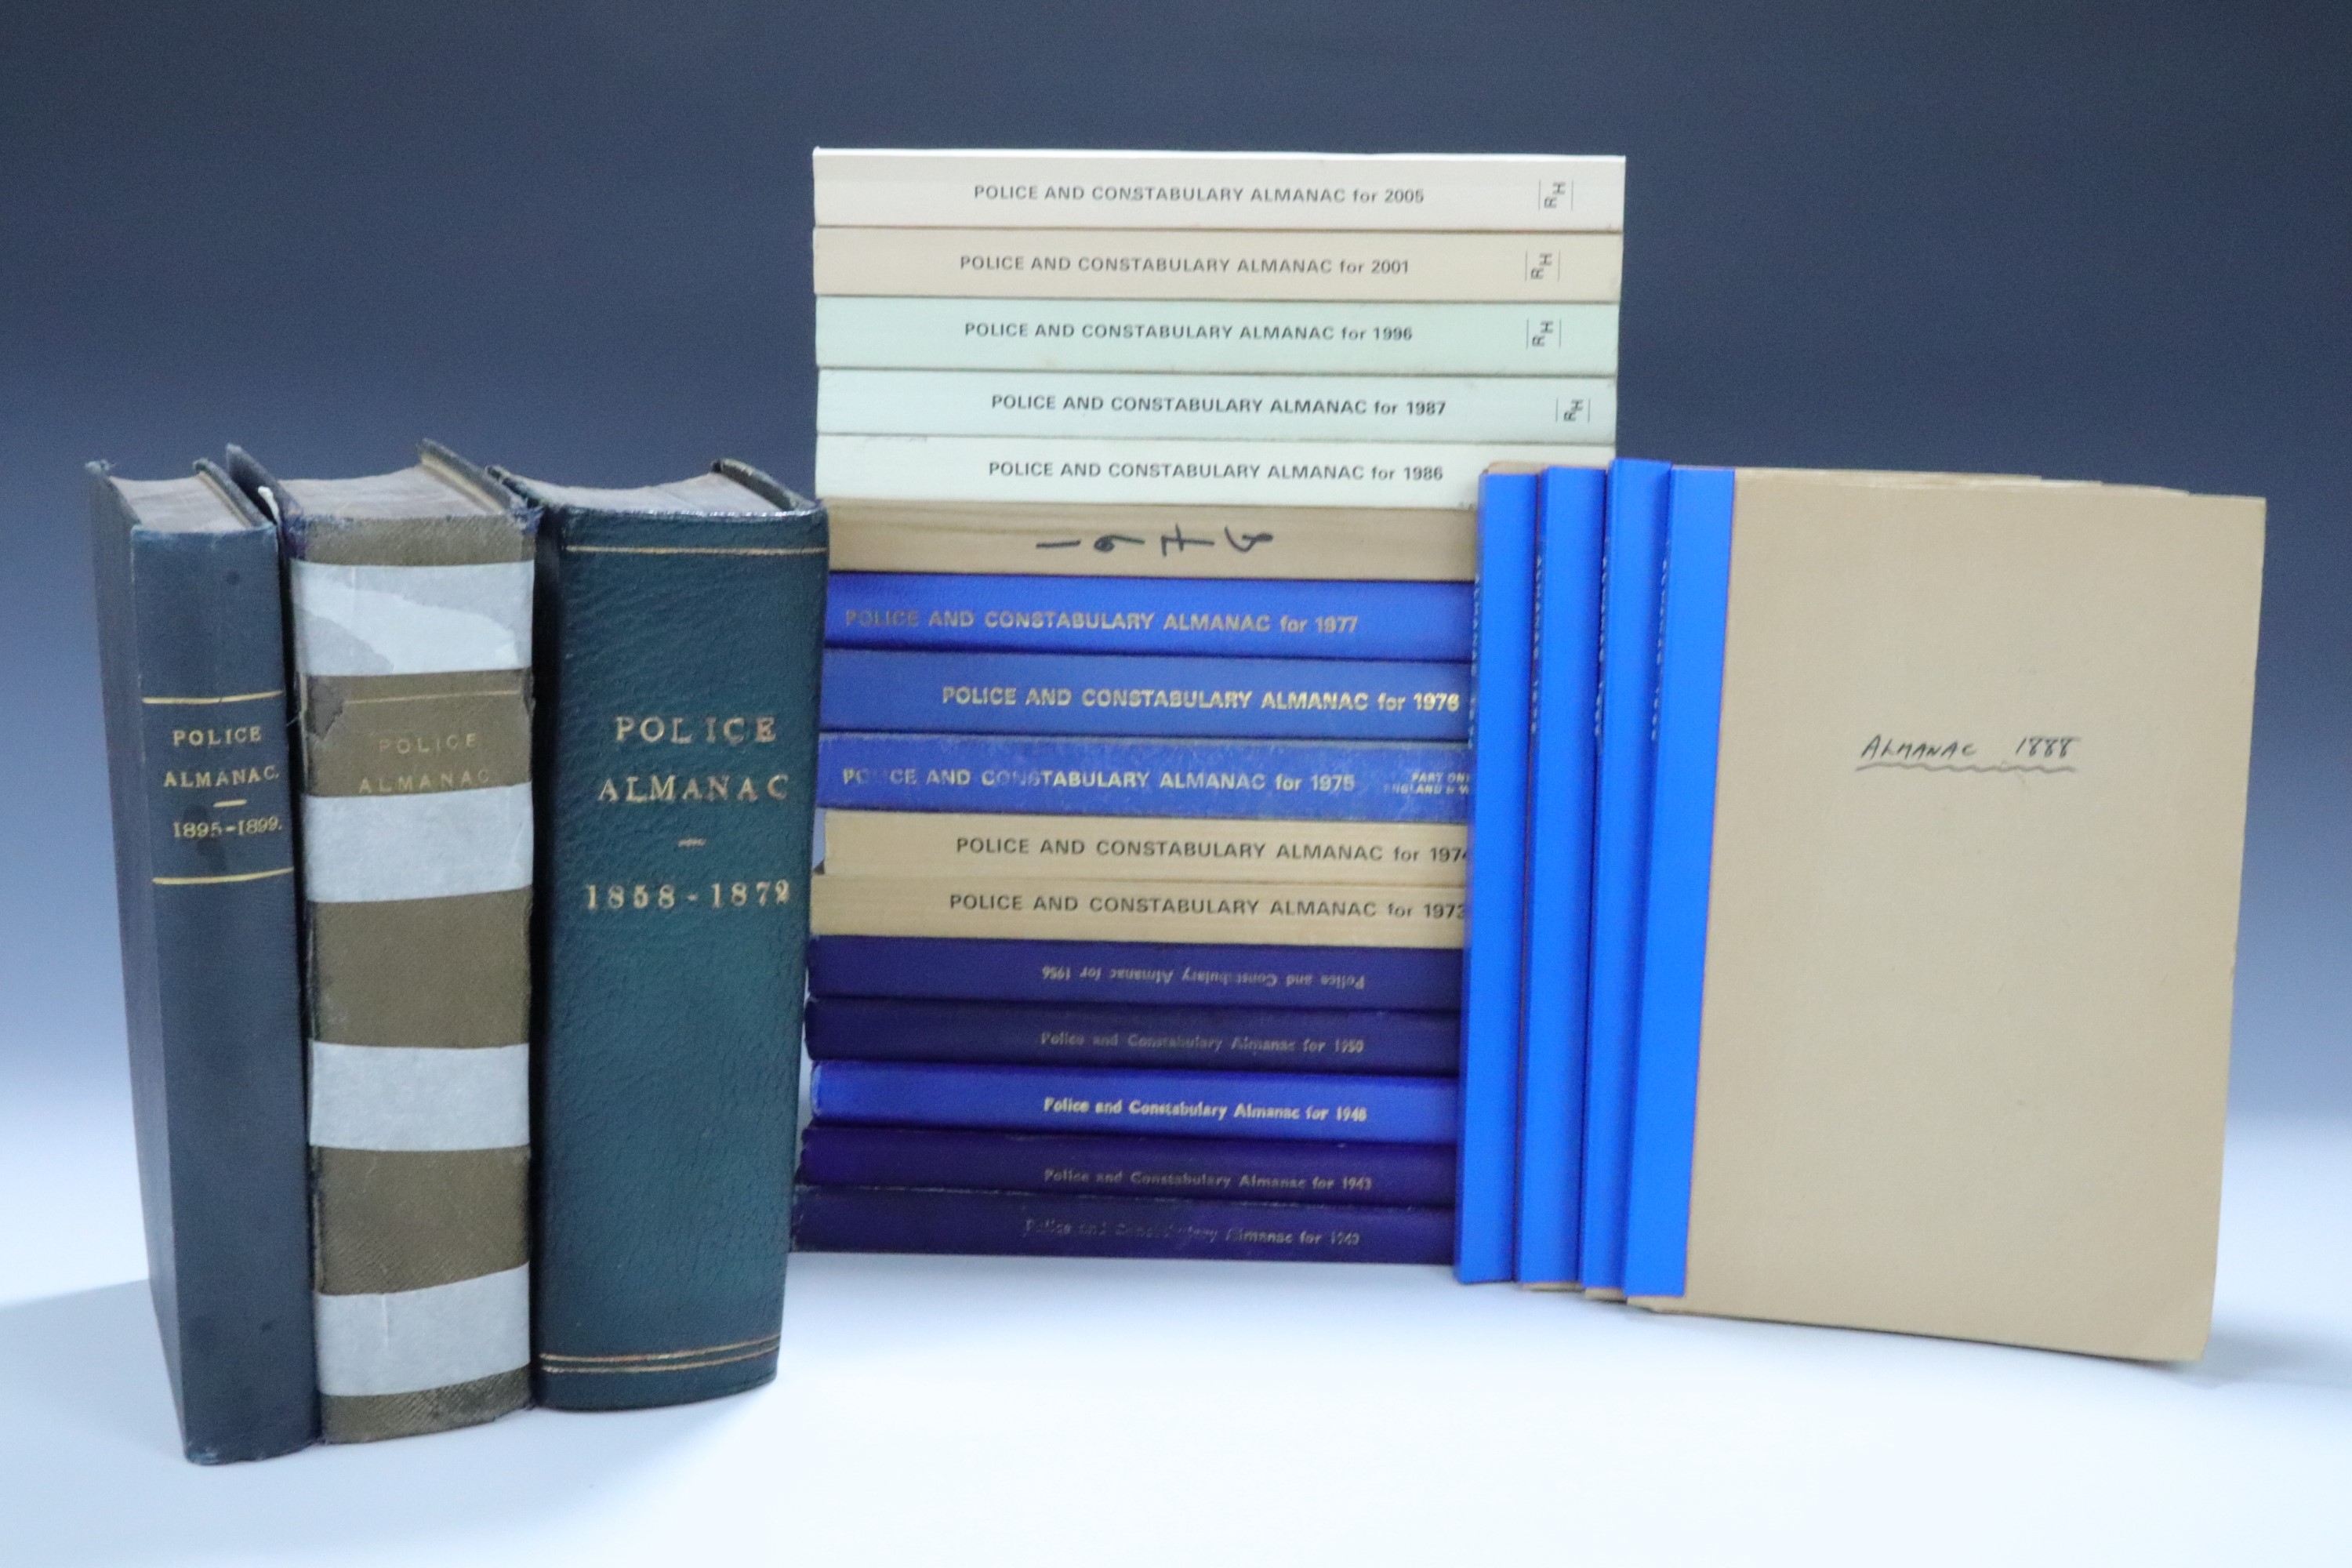 23 volumes of The Police Almanac, including bound copies from 1858-72, 1895-99, 1905-09, 1970s,